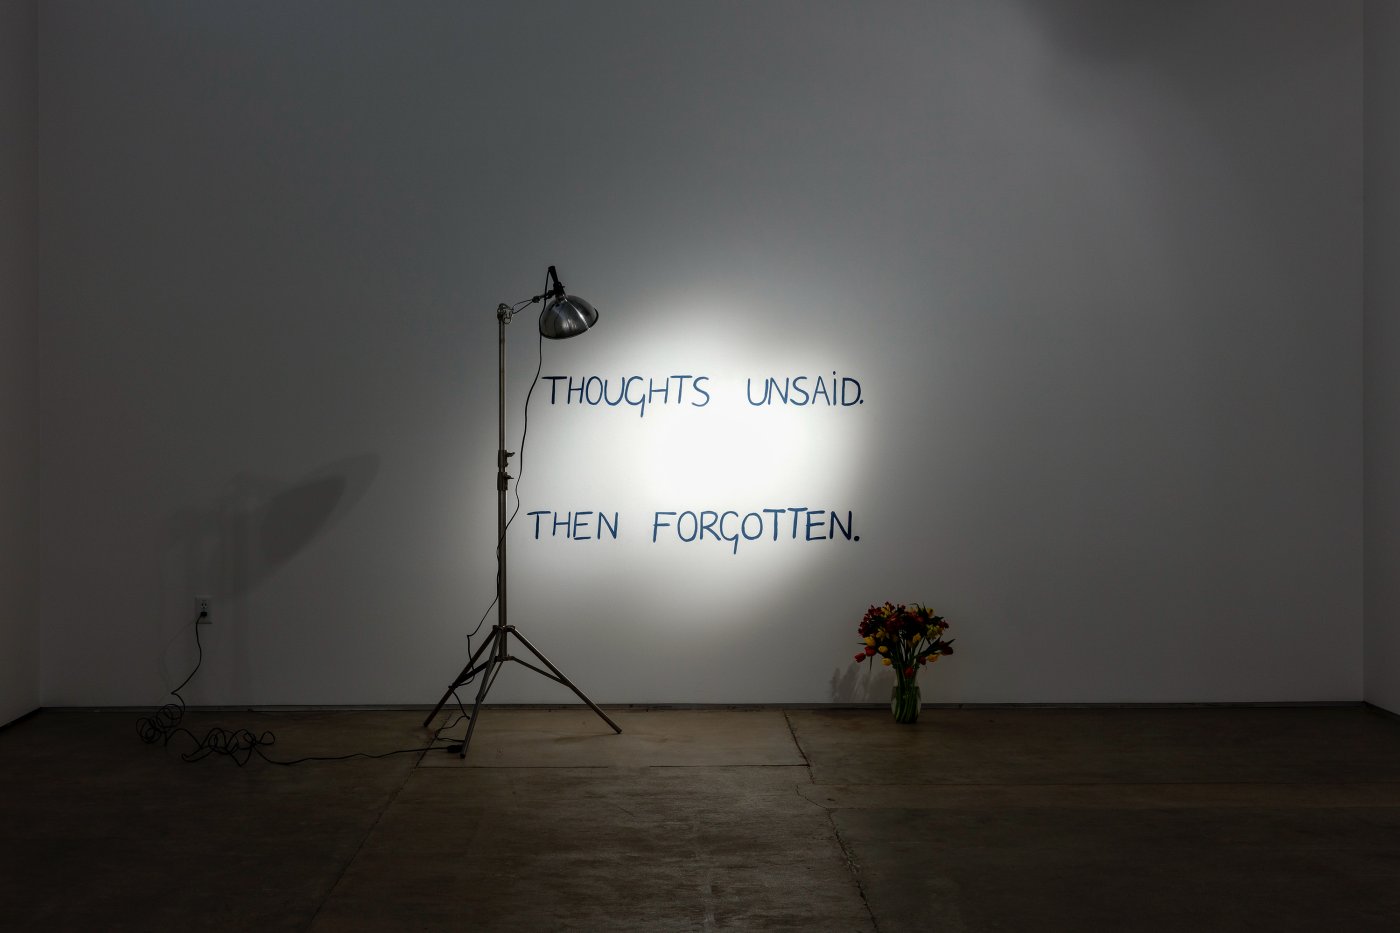 Installation image for Bas Jan Ader: Thoughts unsaid..., at Meliksetian | Briggs